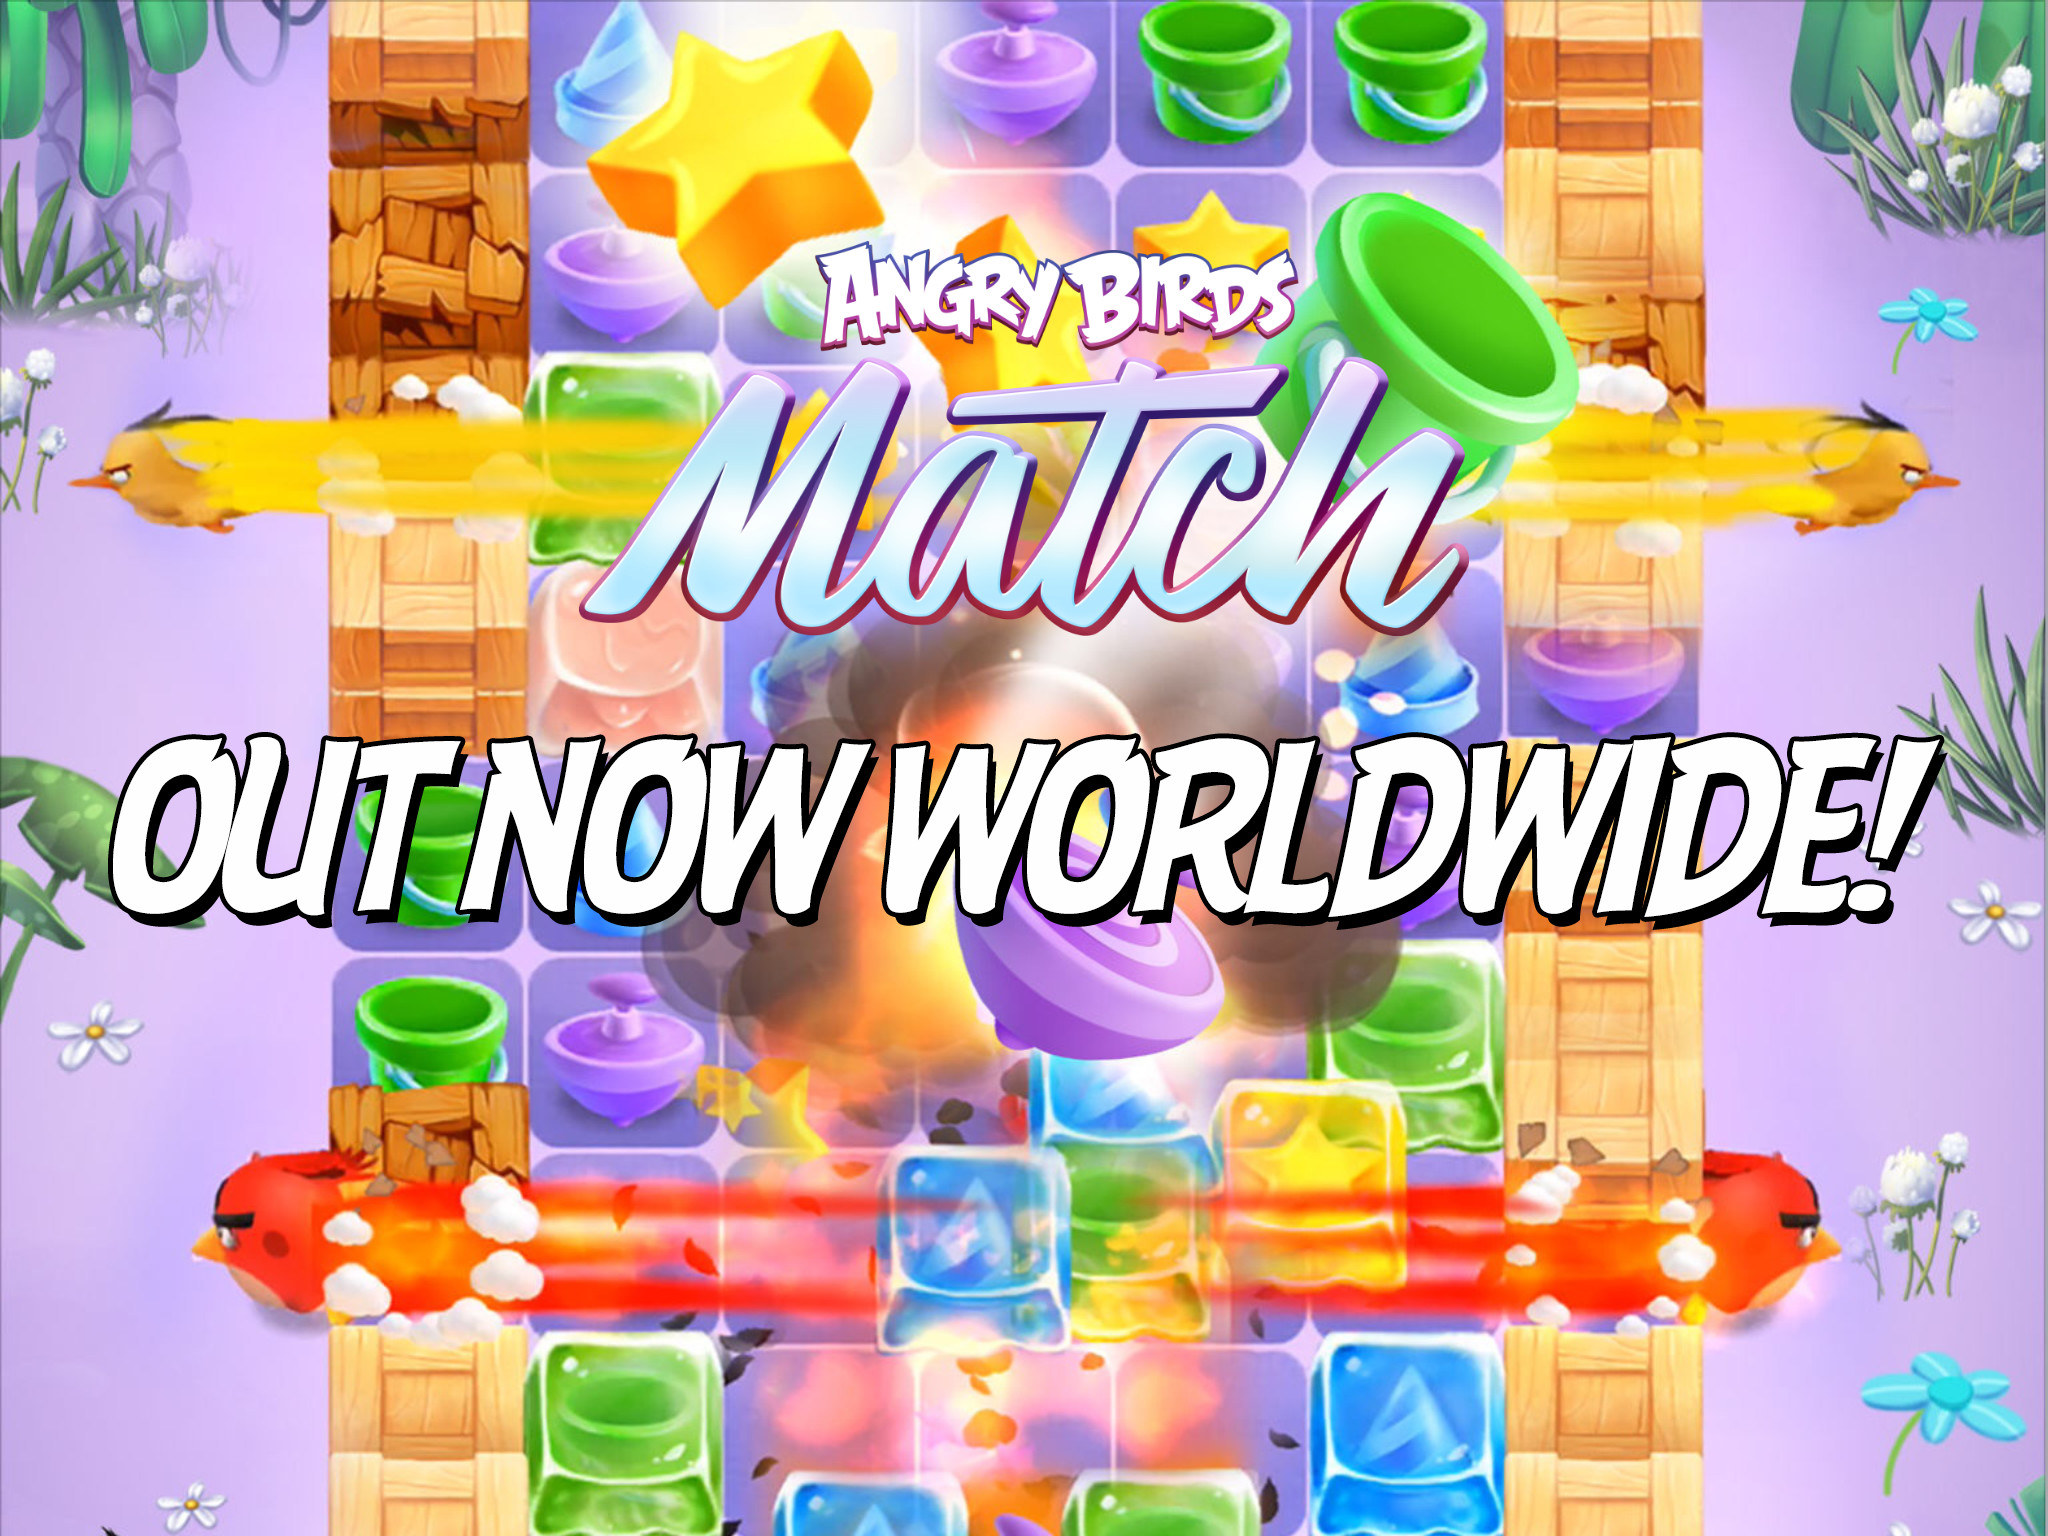 Angry-Birds-Match-Out-Now-Worldwide